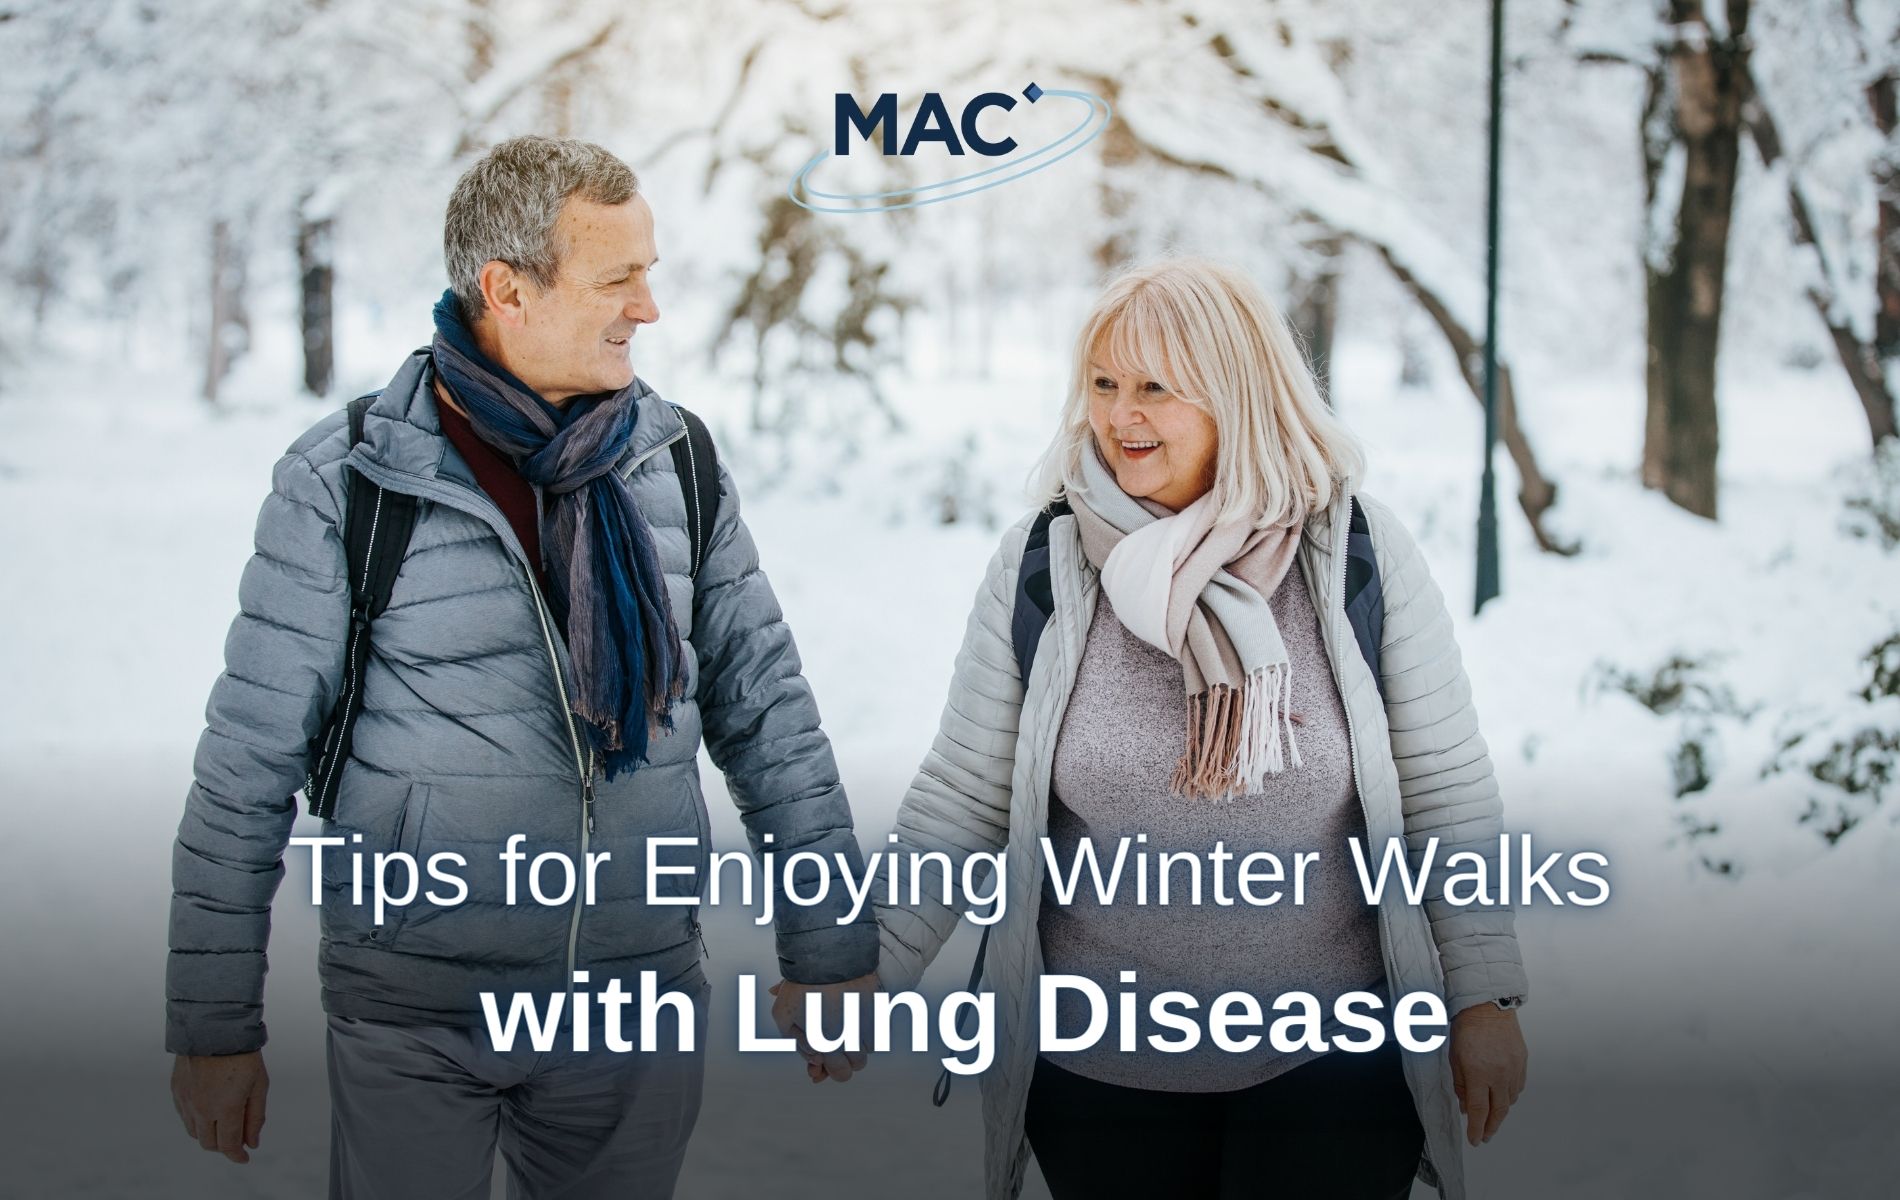 Tips for Enjoying Winter Walks with Lung Disease